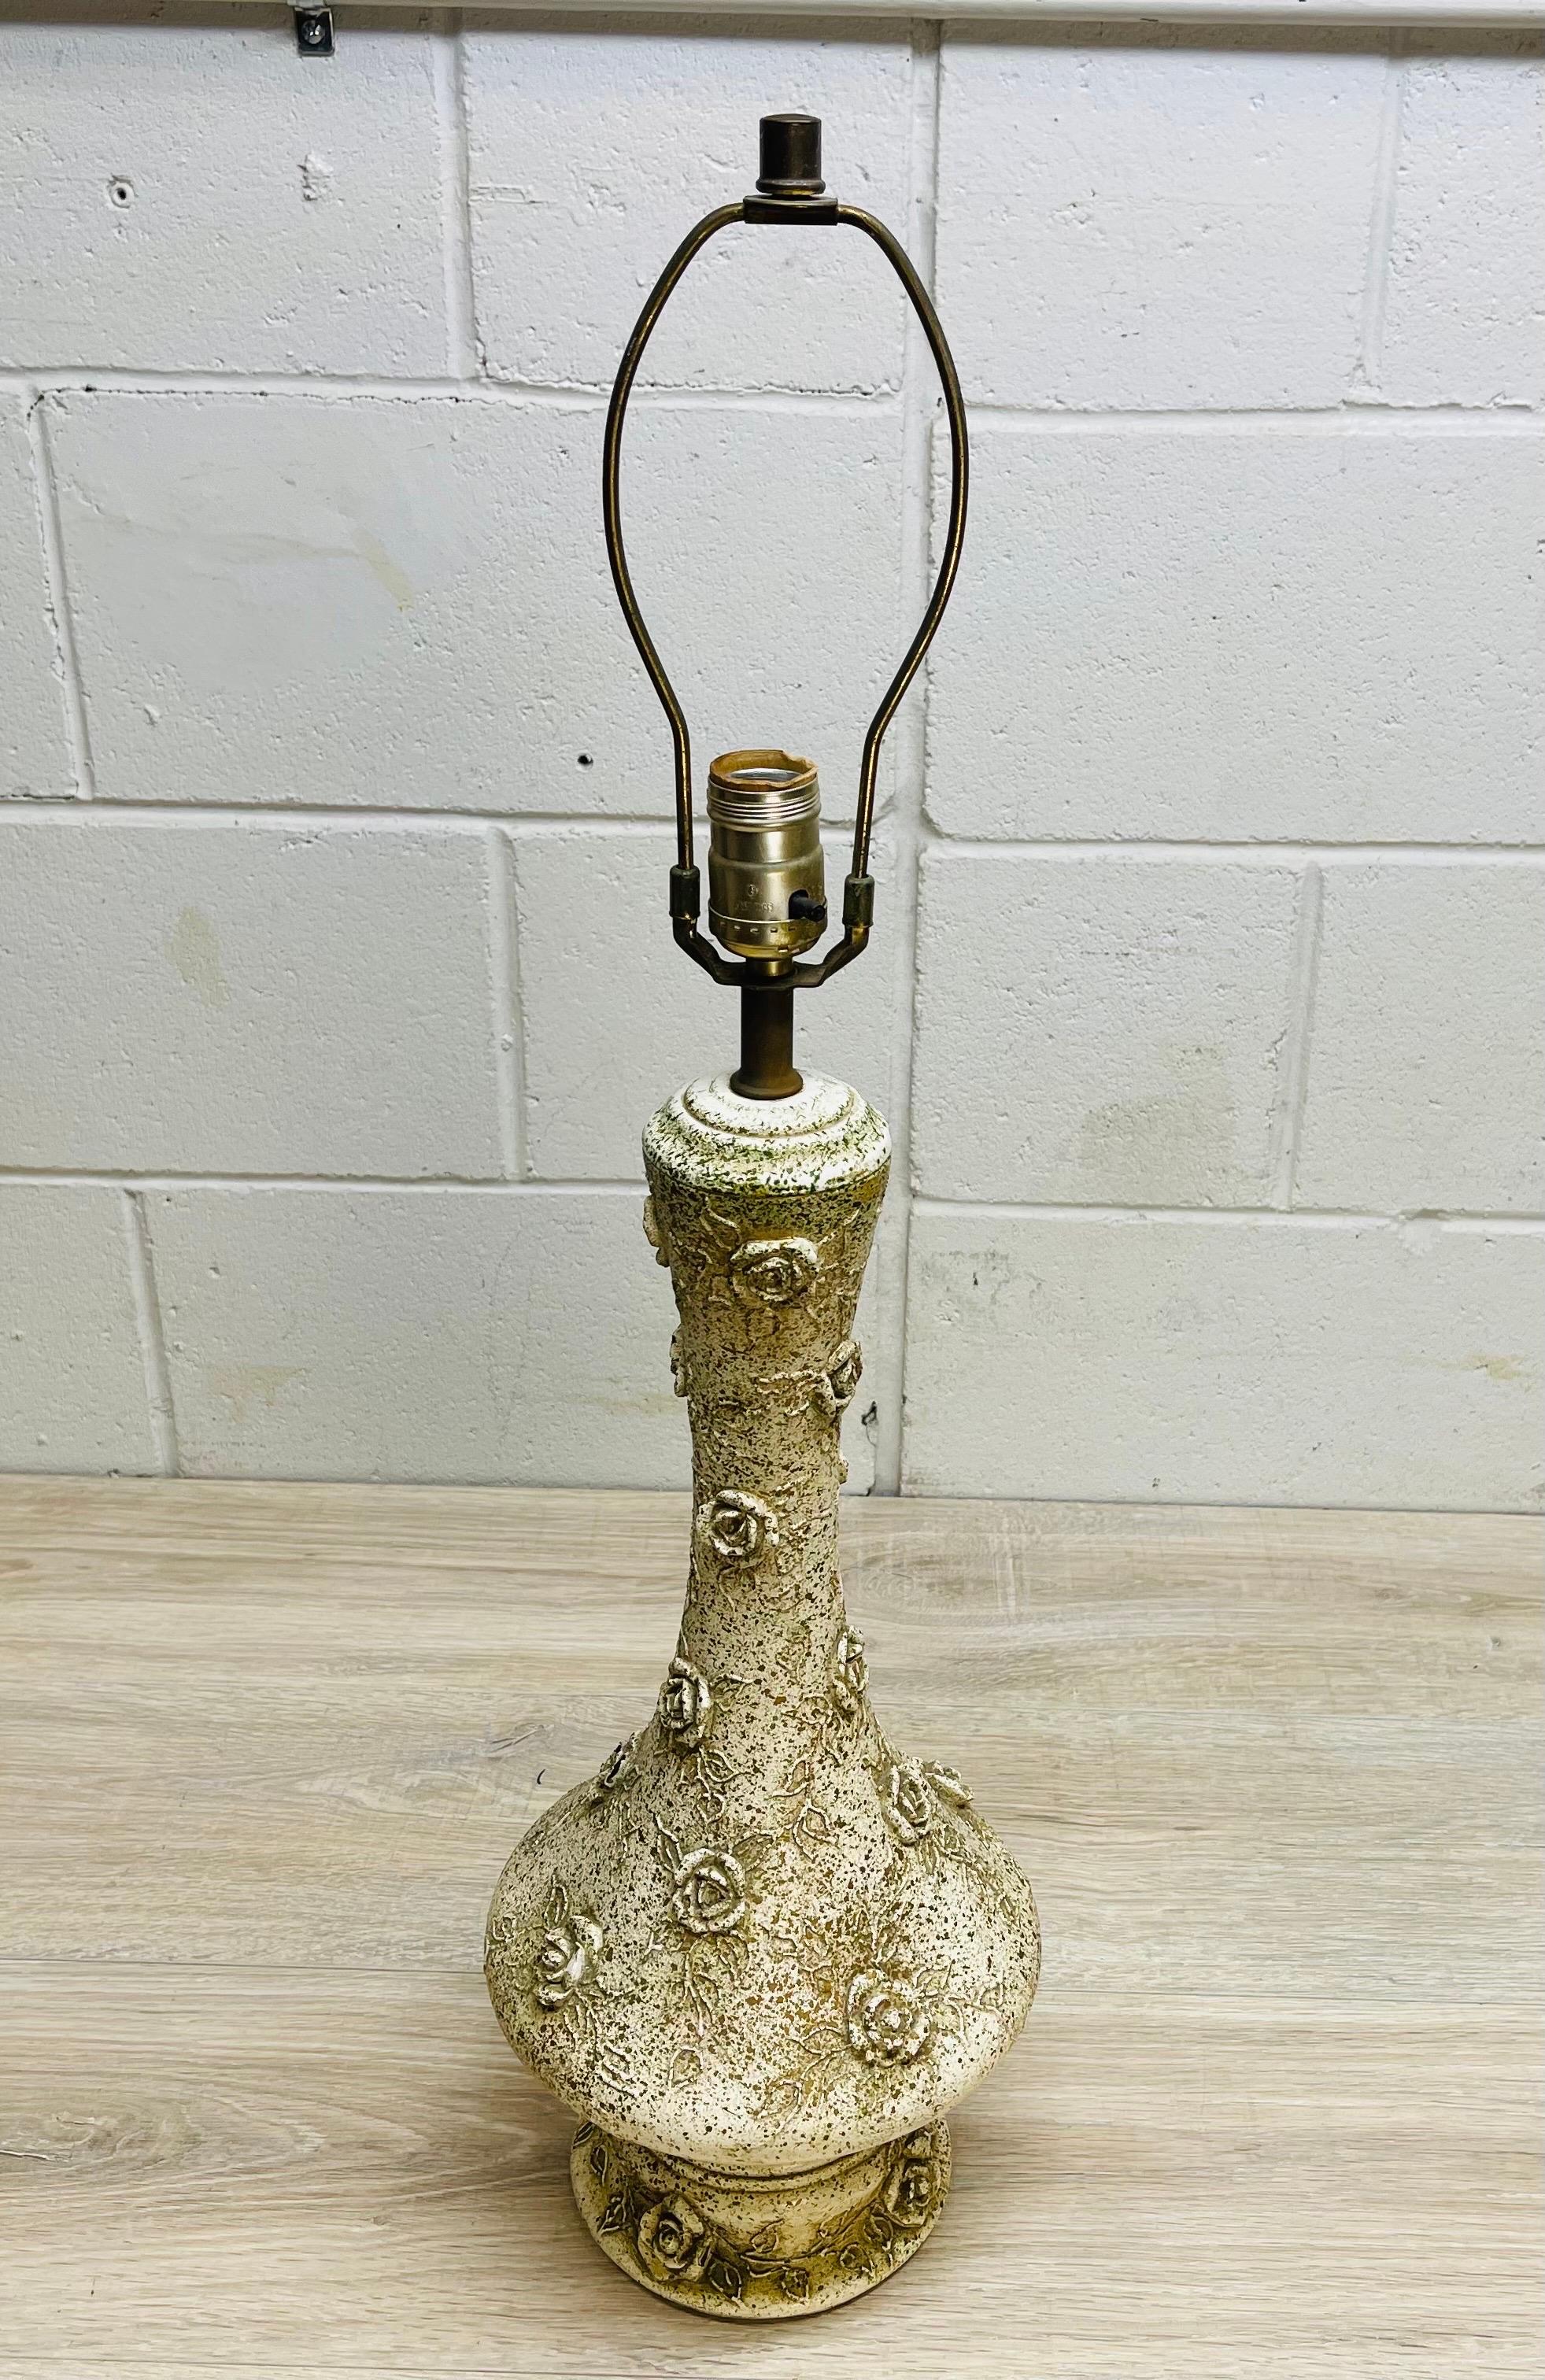 Vintage 1950s ceramic table lamp with a rose design. The lamp is speckled green all over on an off-white base. Wired for the US and in working condition. The lamp uses a standard 100W bulb. Socket, 22”H. Harp, 4”Dia x 8”H. No marks.